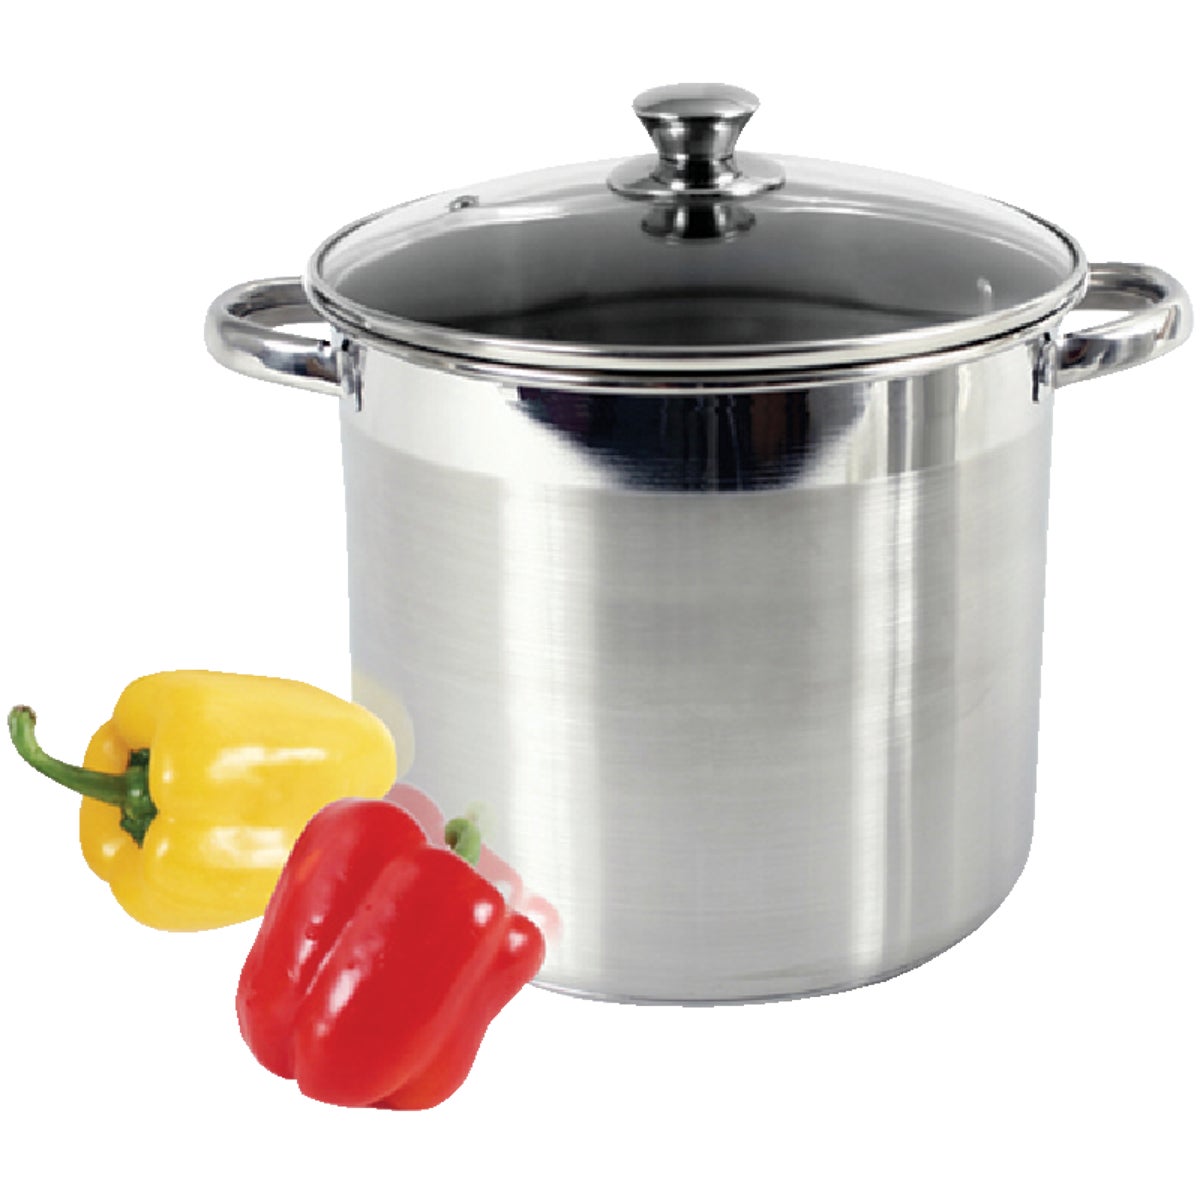 McSunley 16 Qt. Stainless Steel Stockpot